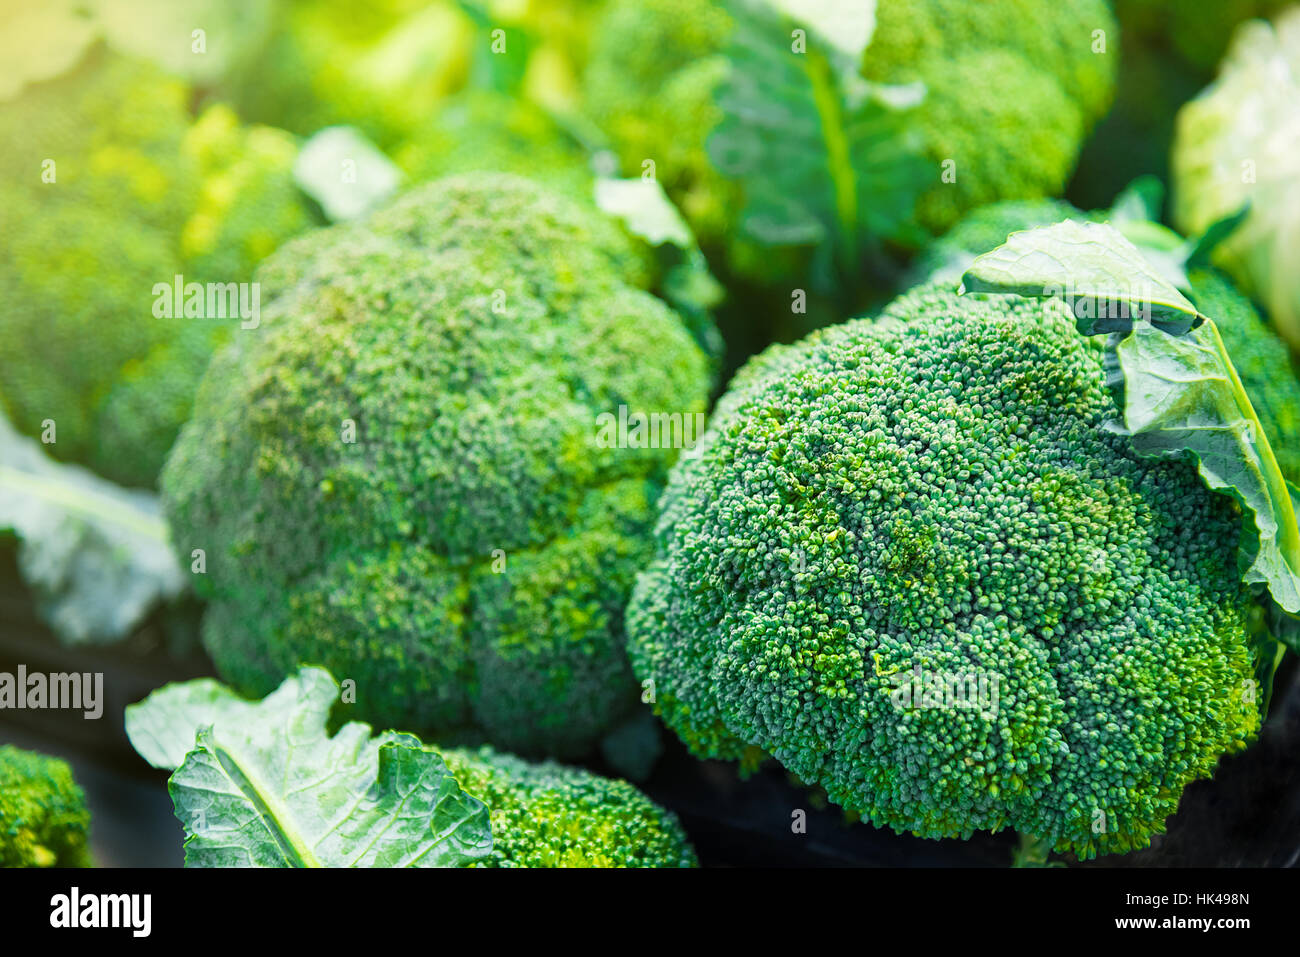 Group of broccoli heads on trays in supermarket, healthcare, diet food, vegetable, vegetarian, vegan concept closeup and selective focus Stock Photo